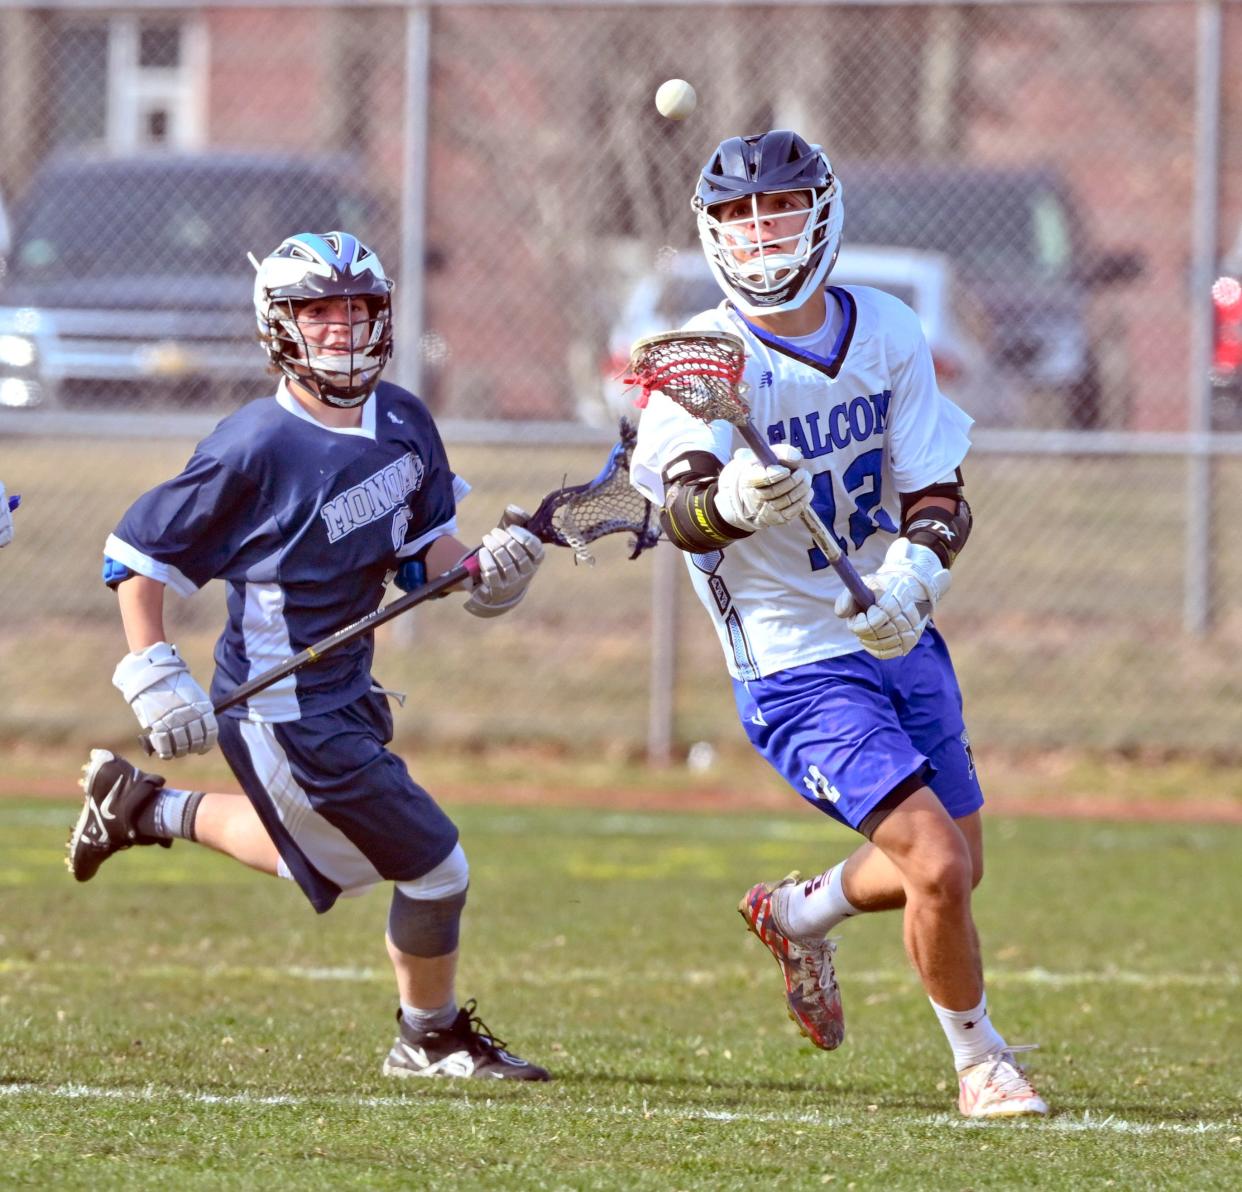 MASHPEE   04/13/22   Dominic Matteodo of Mashpee attempts to control the ball with Tamer Khalil of Monomoy.